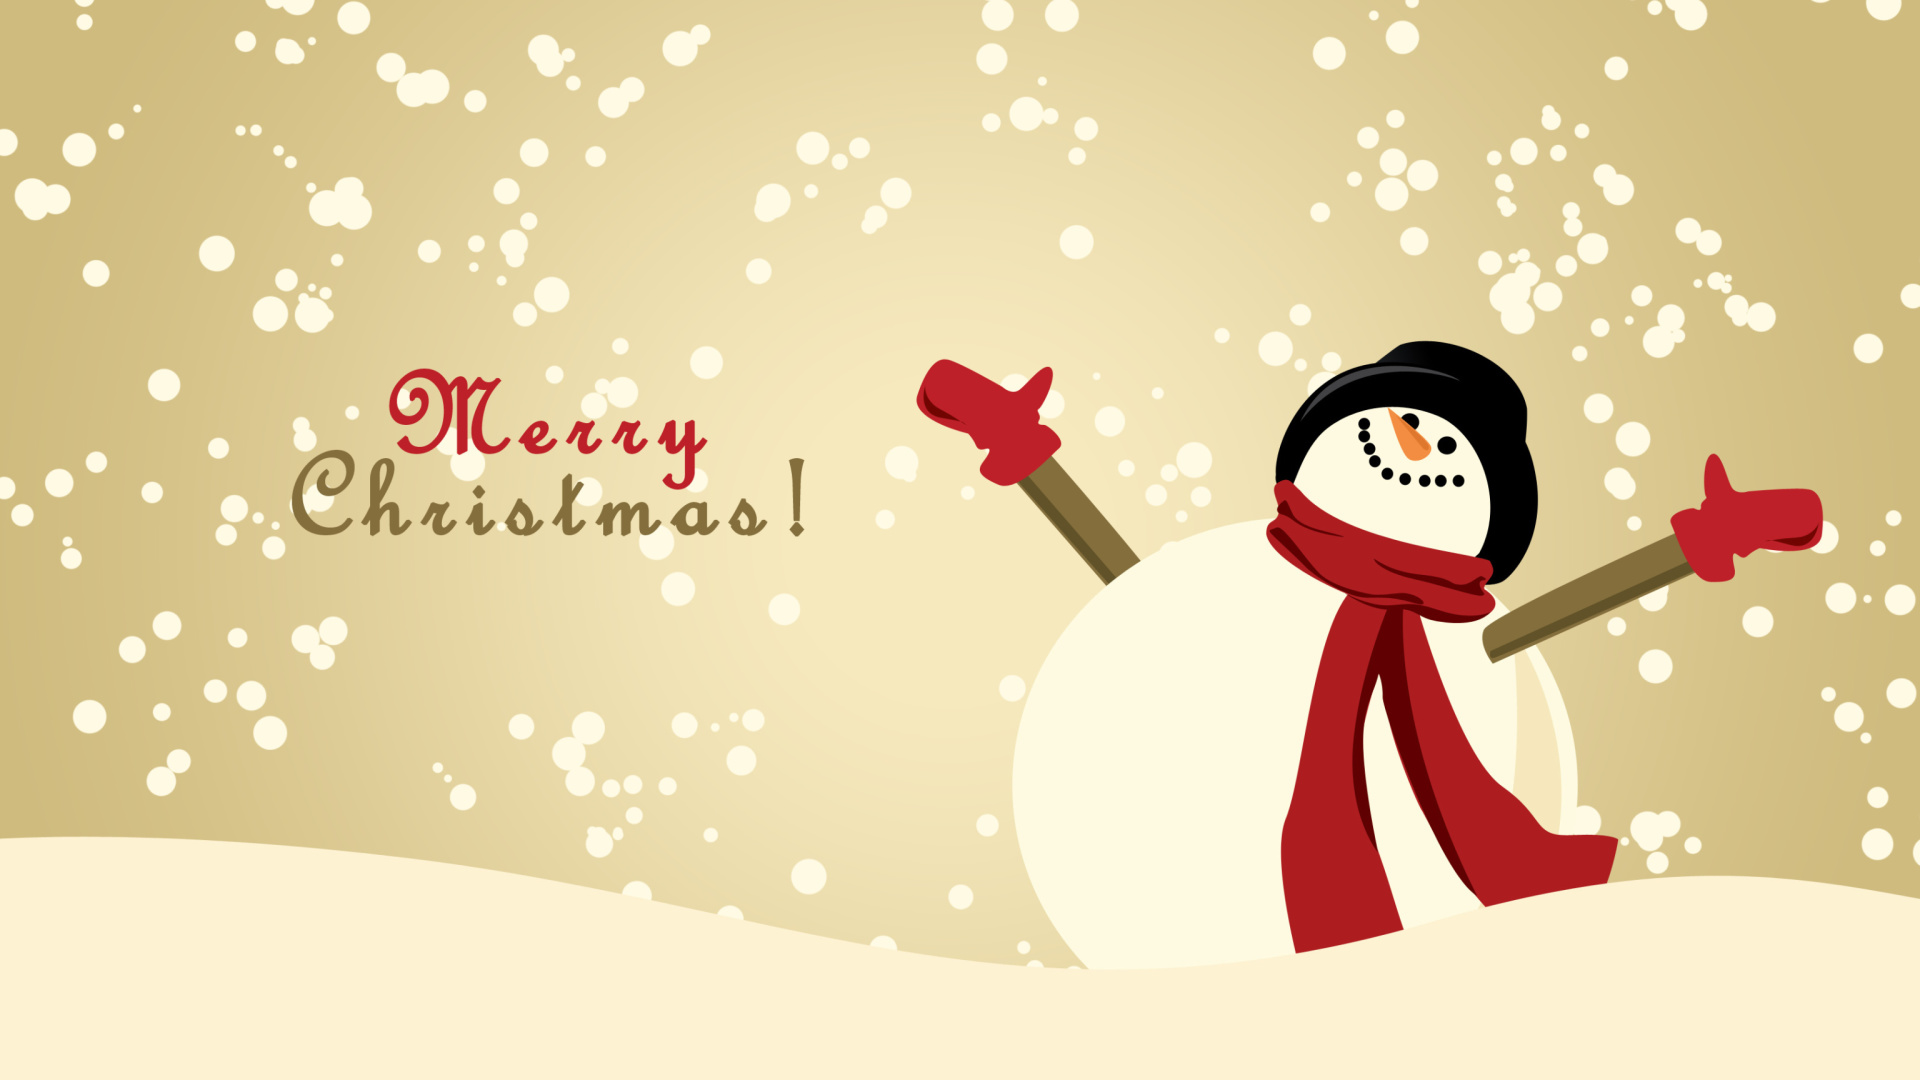 Merry Christmas Wishes from Snowman wallpaper 1920x1080